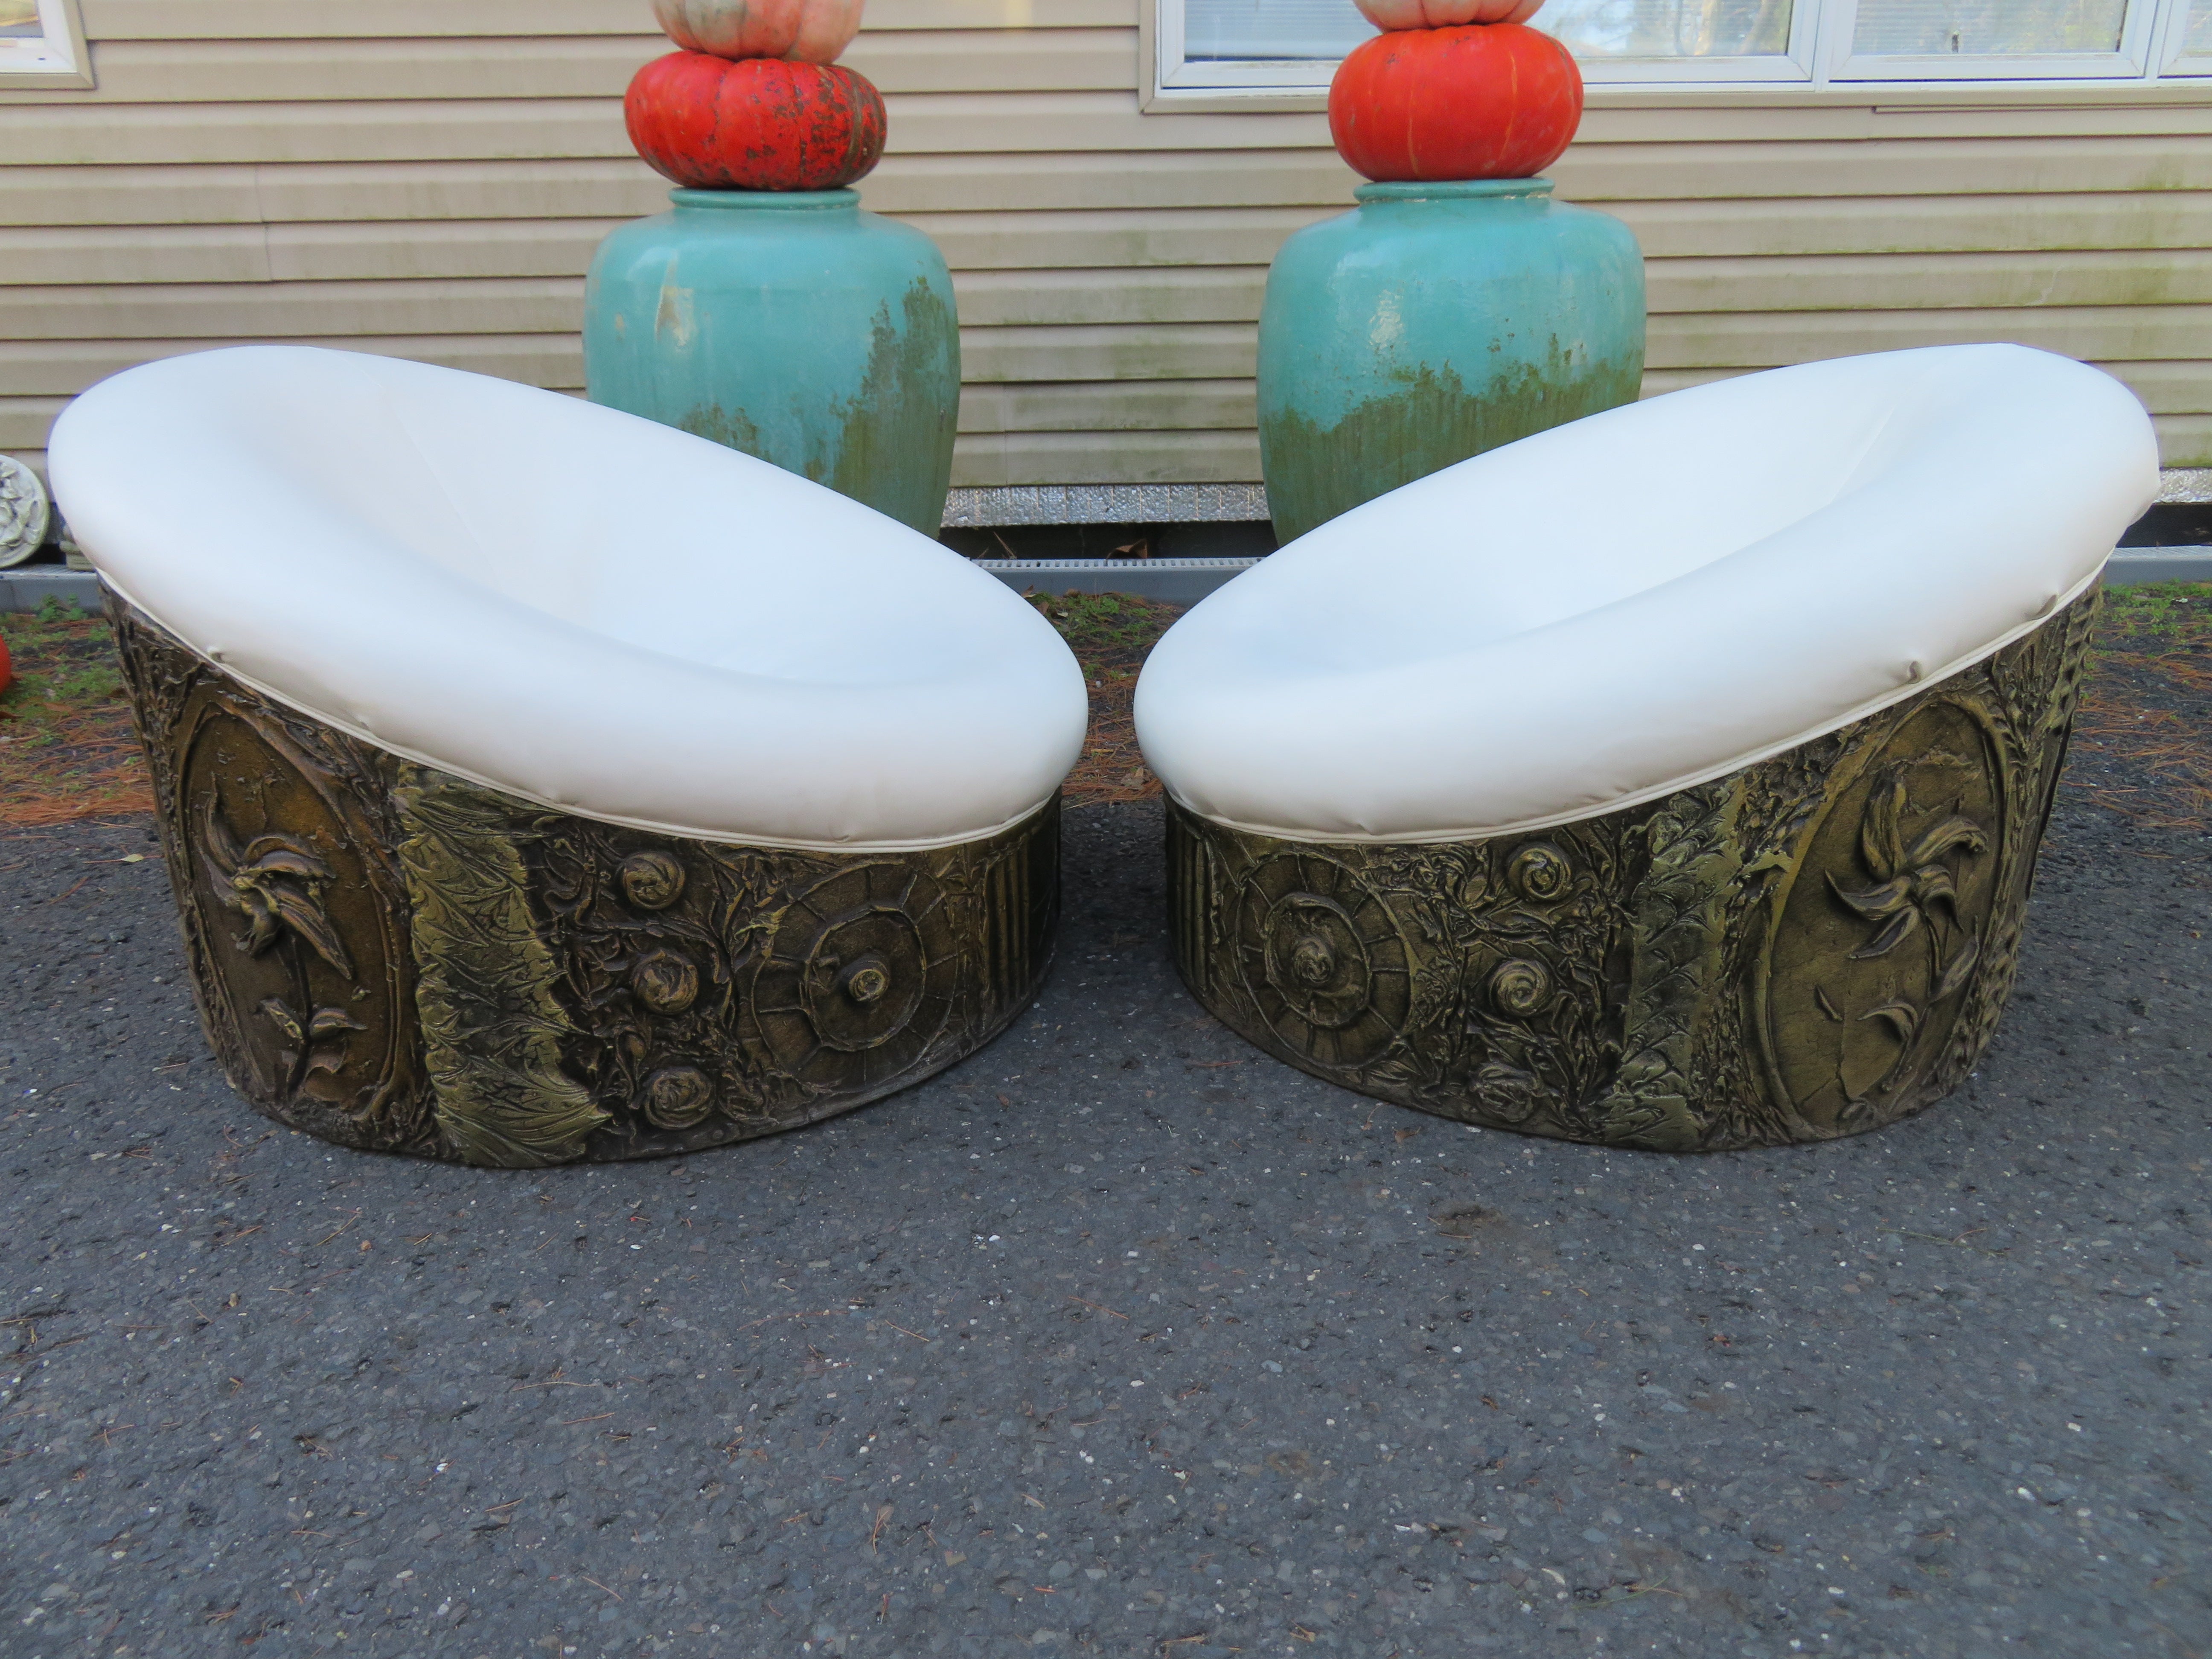 Amazing pair of Adrian Pearsall Brutalist pod lounge chairs. Chairs have rather newish white faux leather in nice clean condition, circa 1970s. They measure 23